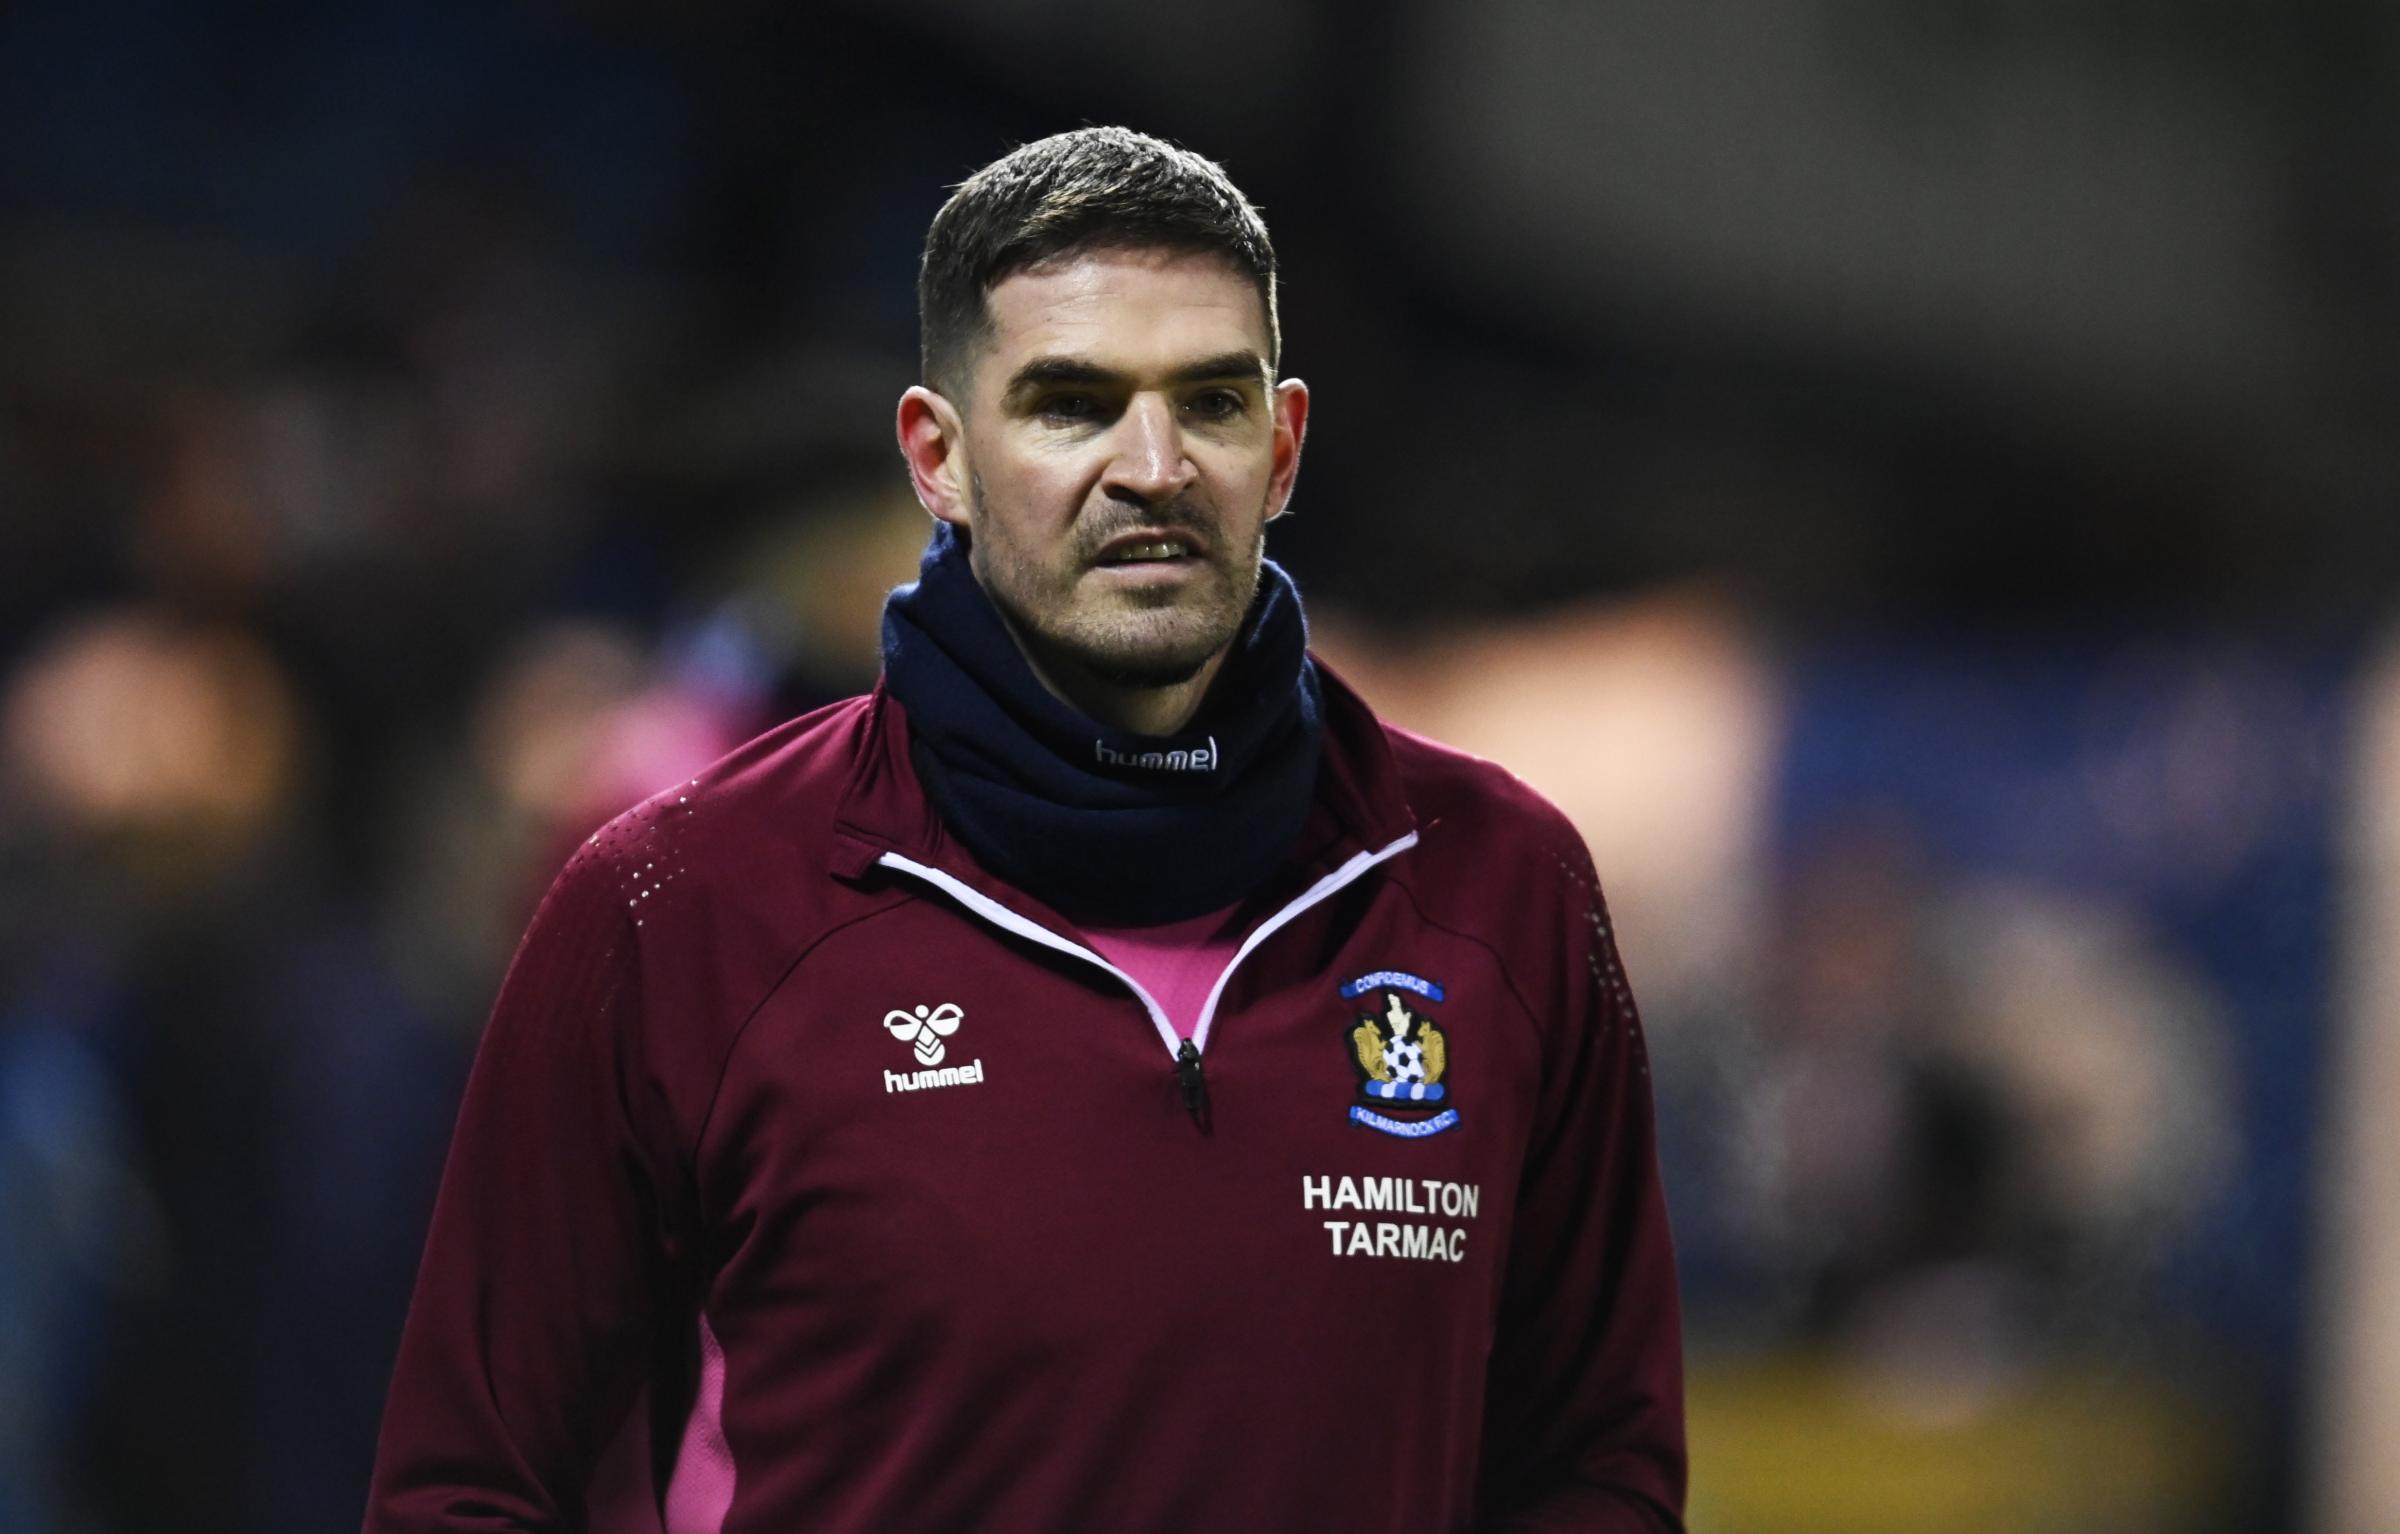 Kyle Lafferty tipped for Linfield return after Kilmarnock exit